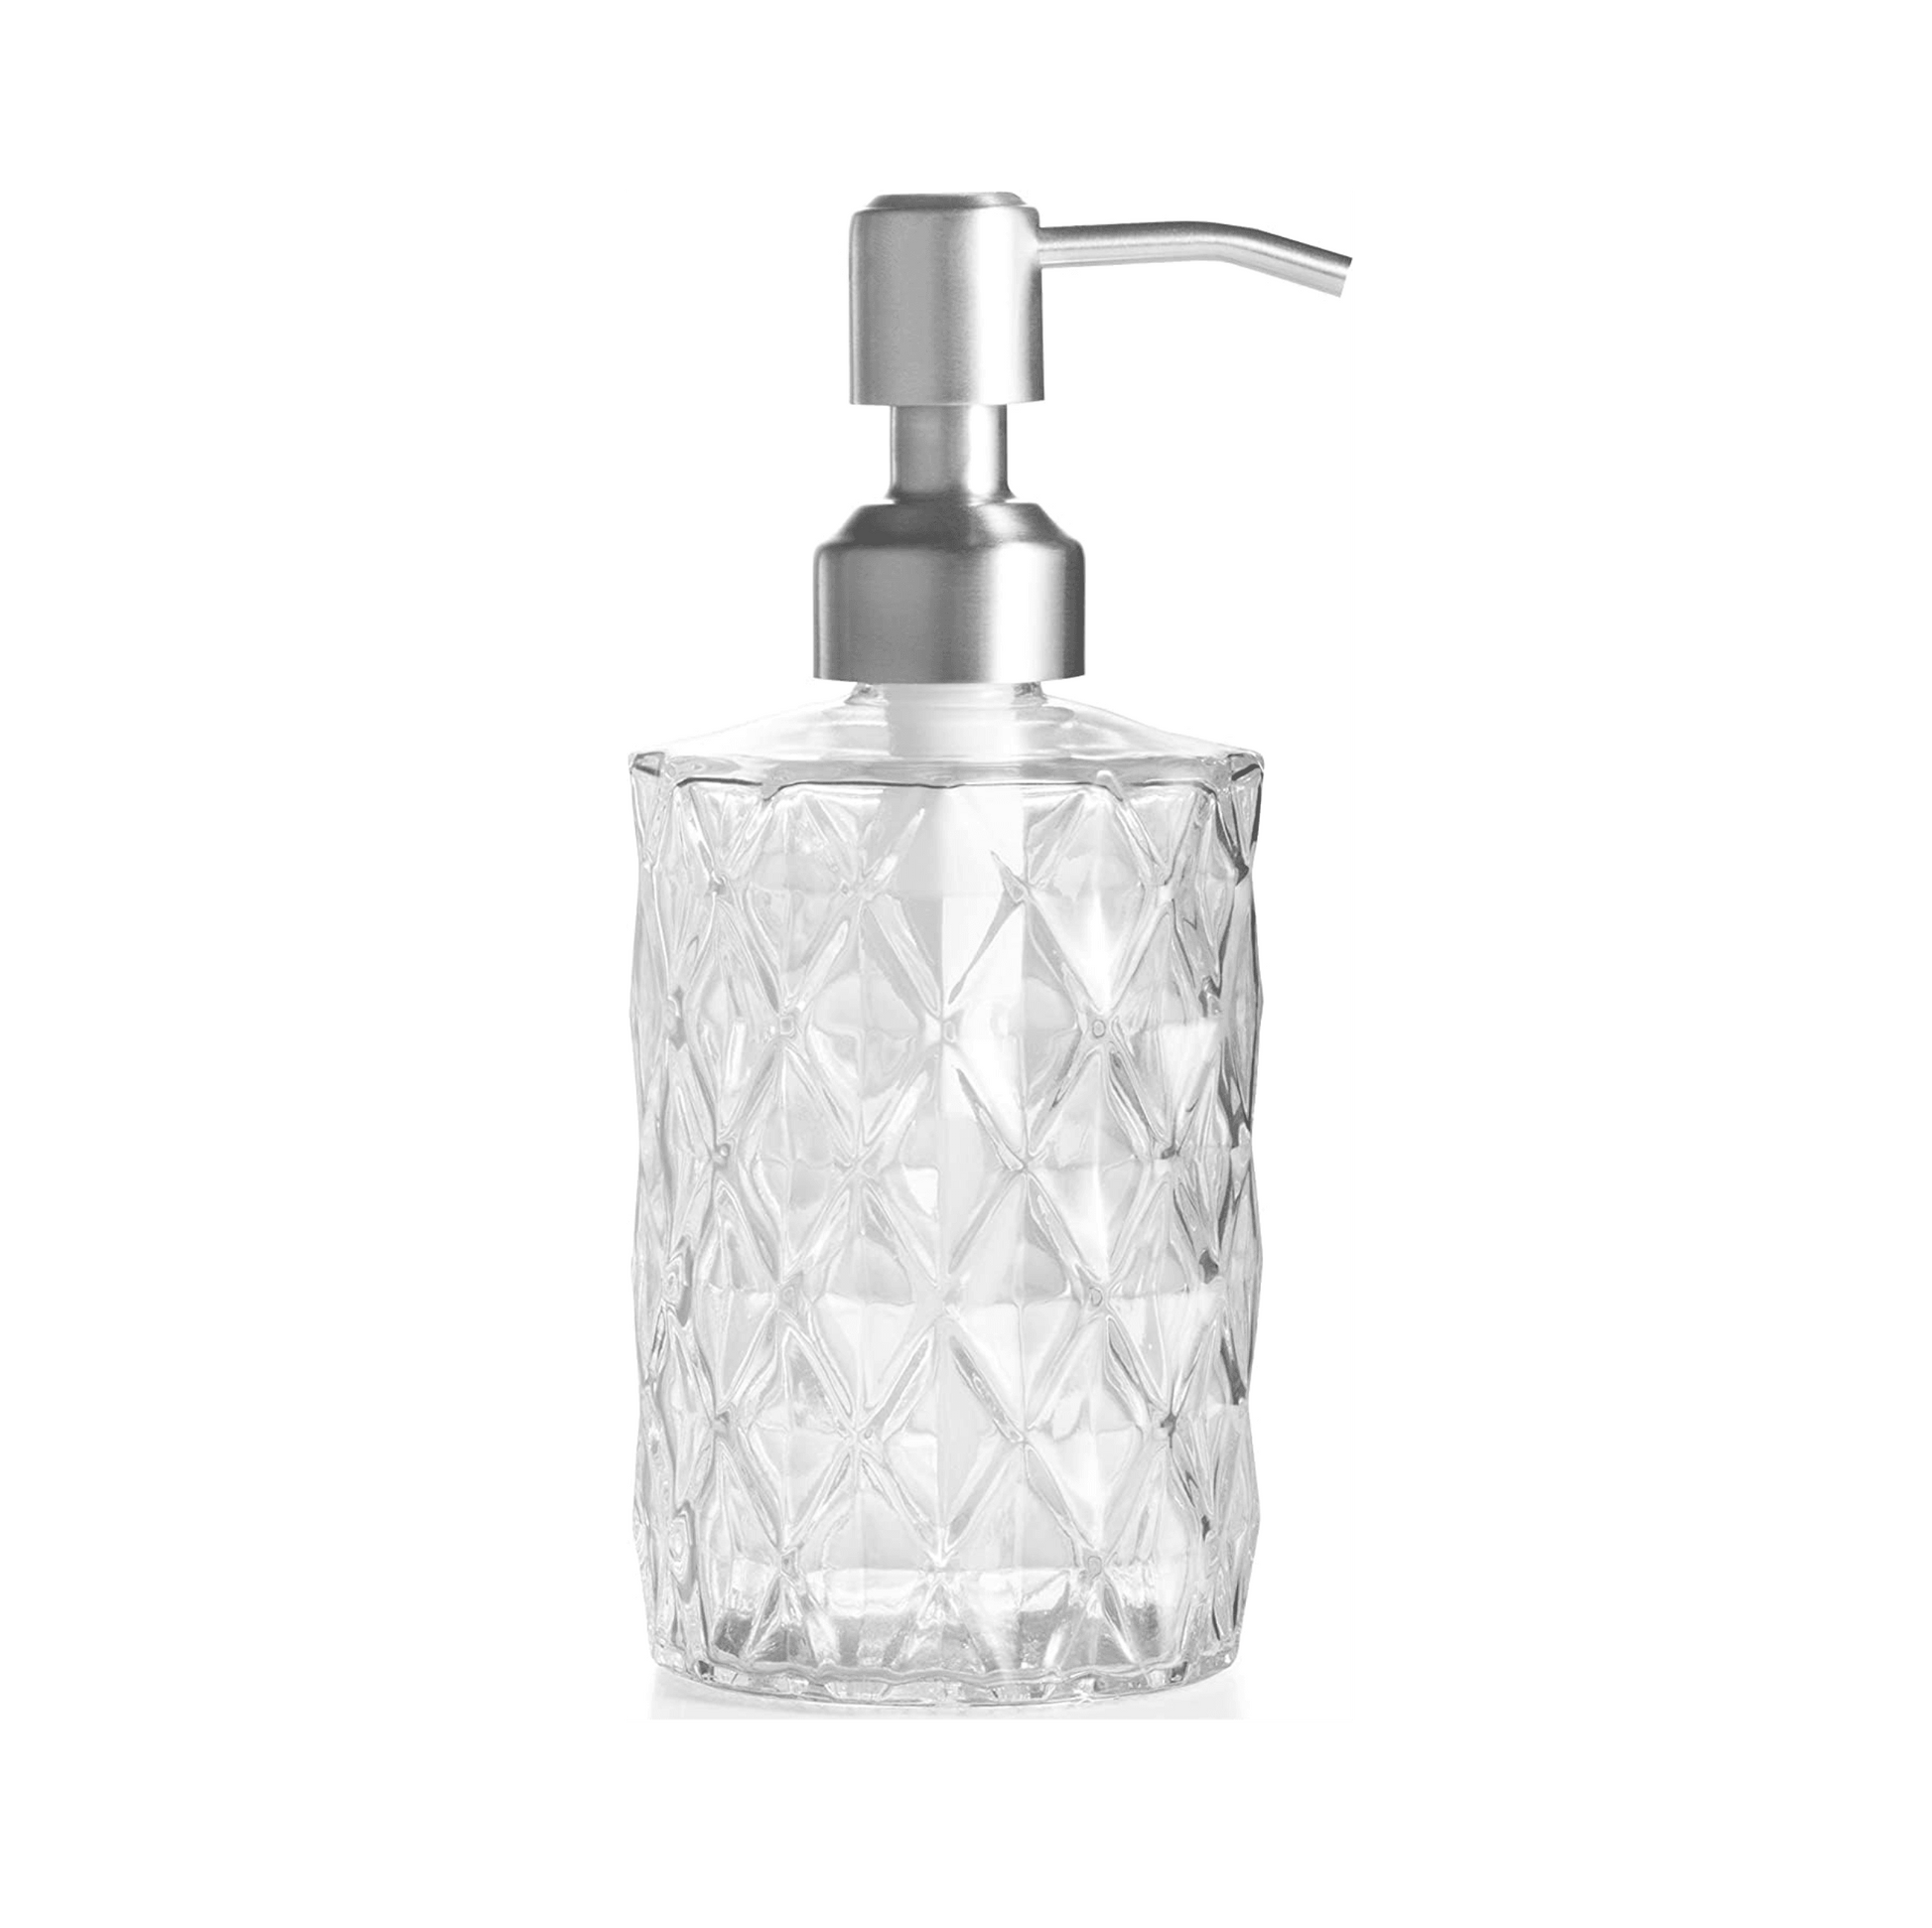 Fossa Glass Soap Dispenser - Refillable Wash Hand Liquid, Dish Detergent, Shampoo Lotion Bottle with Brushed Nickel Pump Holder, Ideal for Bathroom Countertop, Kitchen, Laundry Room GSD-001 - Fossa Home 